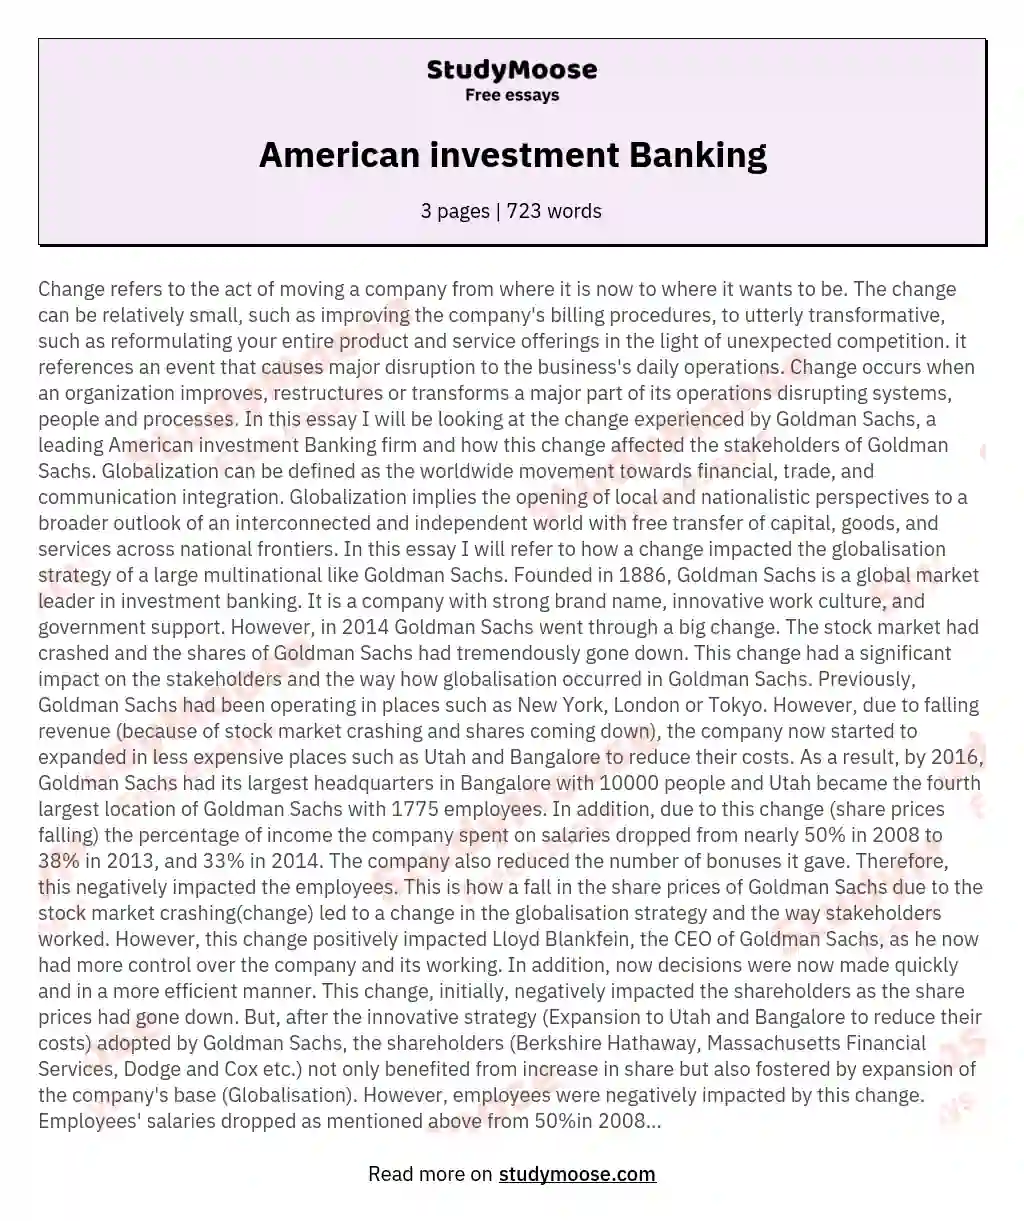 American investment Banking essay